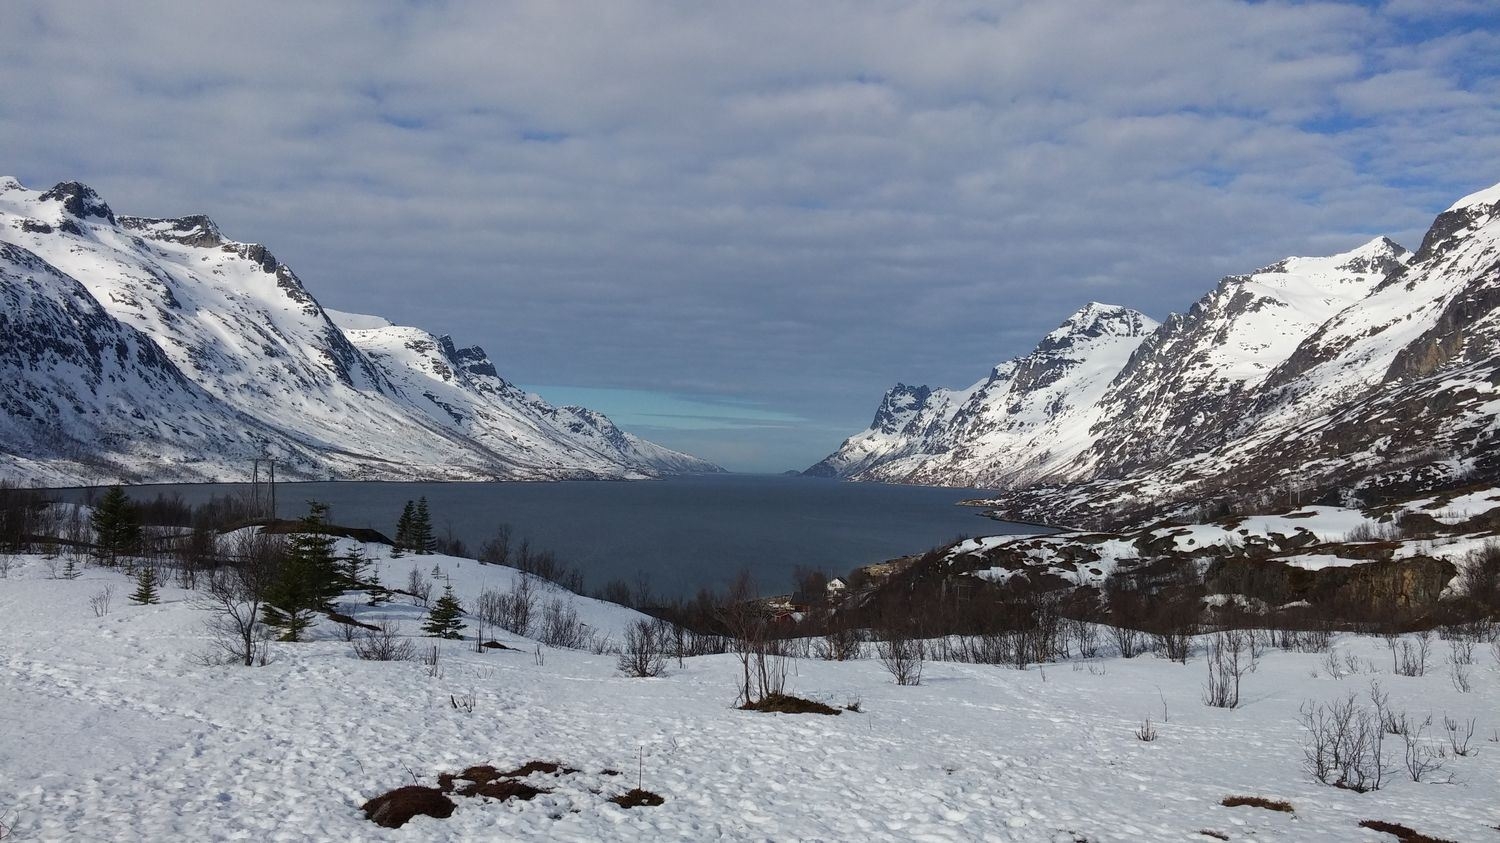 Fjord surrounded by snowy mountains